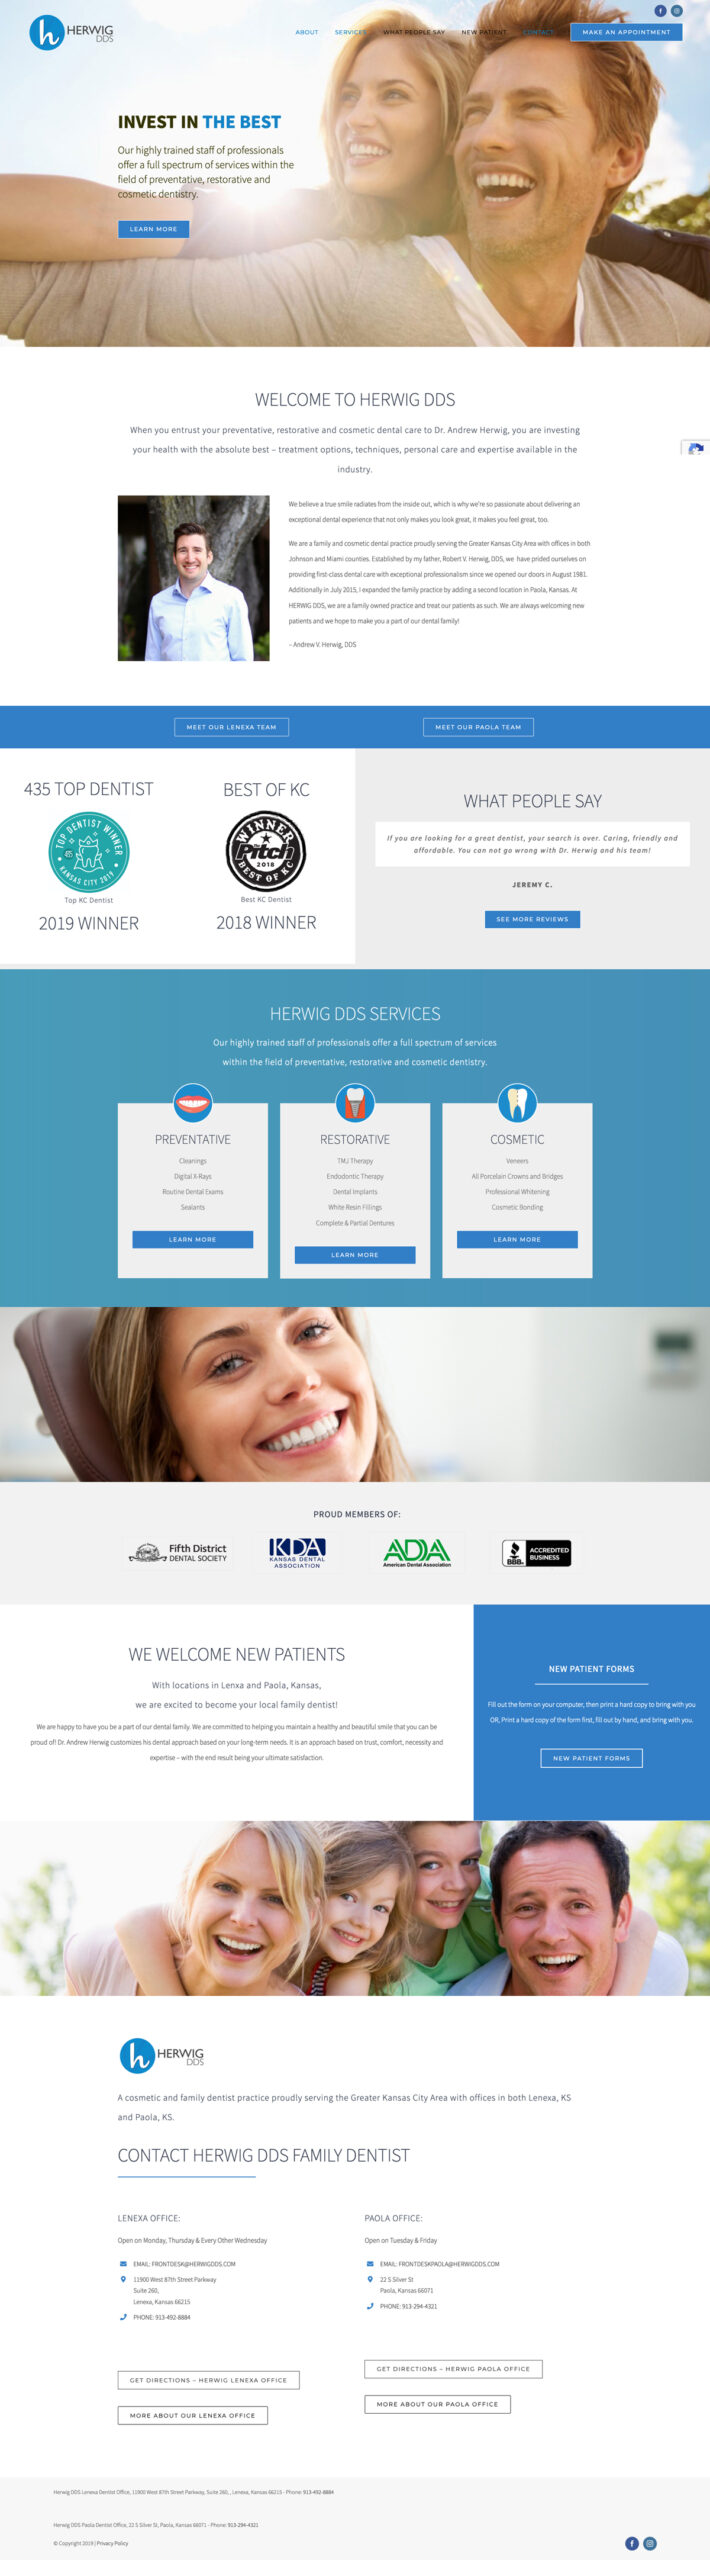 Web Design for Herwig, DDS Home Page